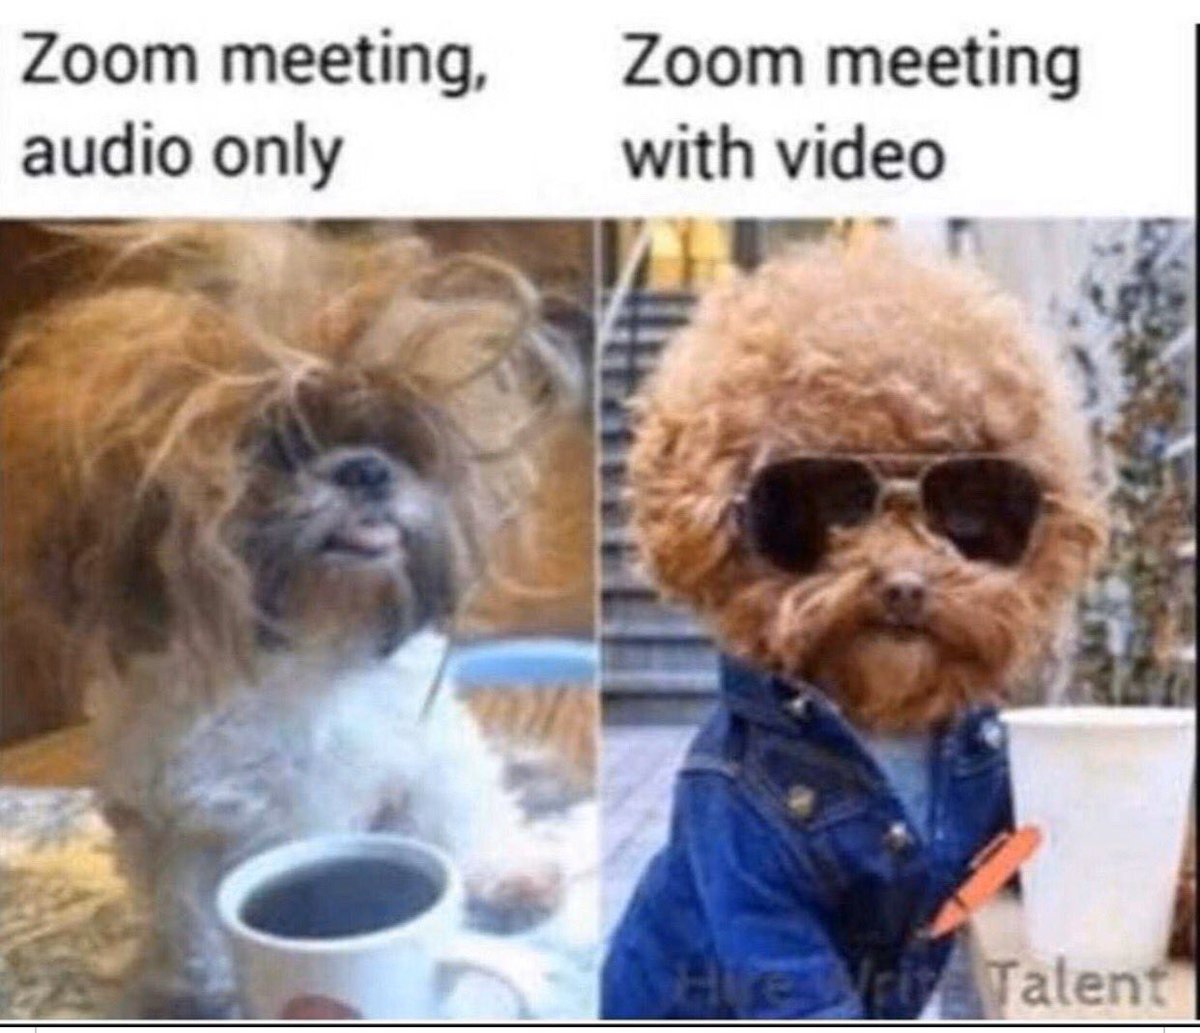 We can all relate! #audioconferencing